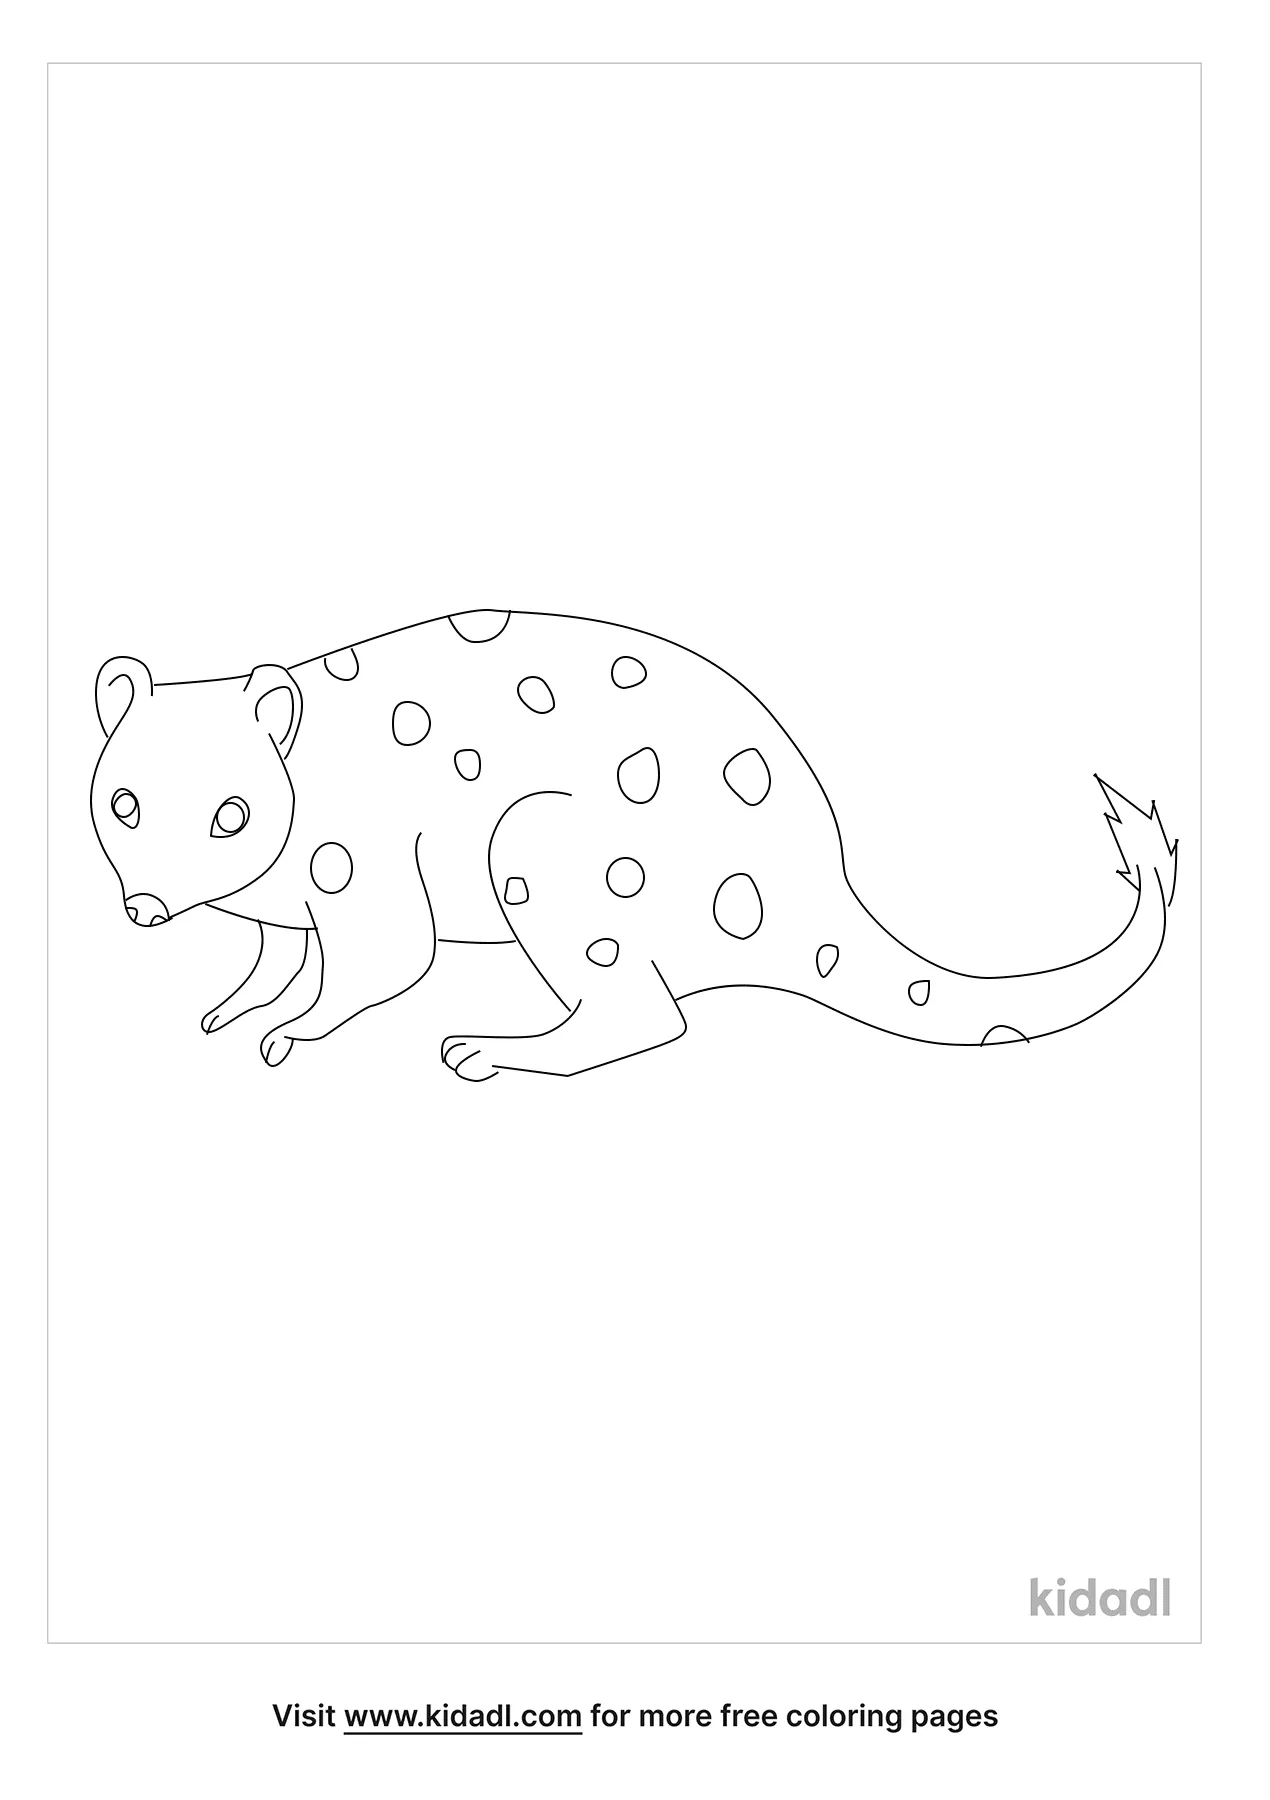 Free Quoll Coloring Page | Coloring Page Printables | Kidadl